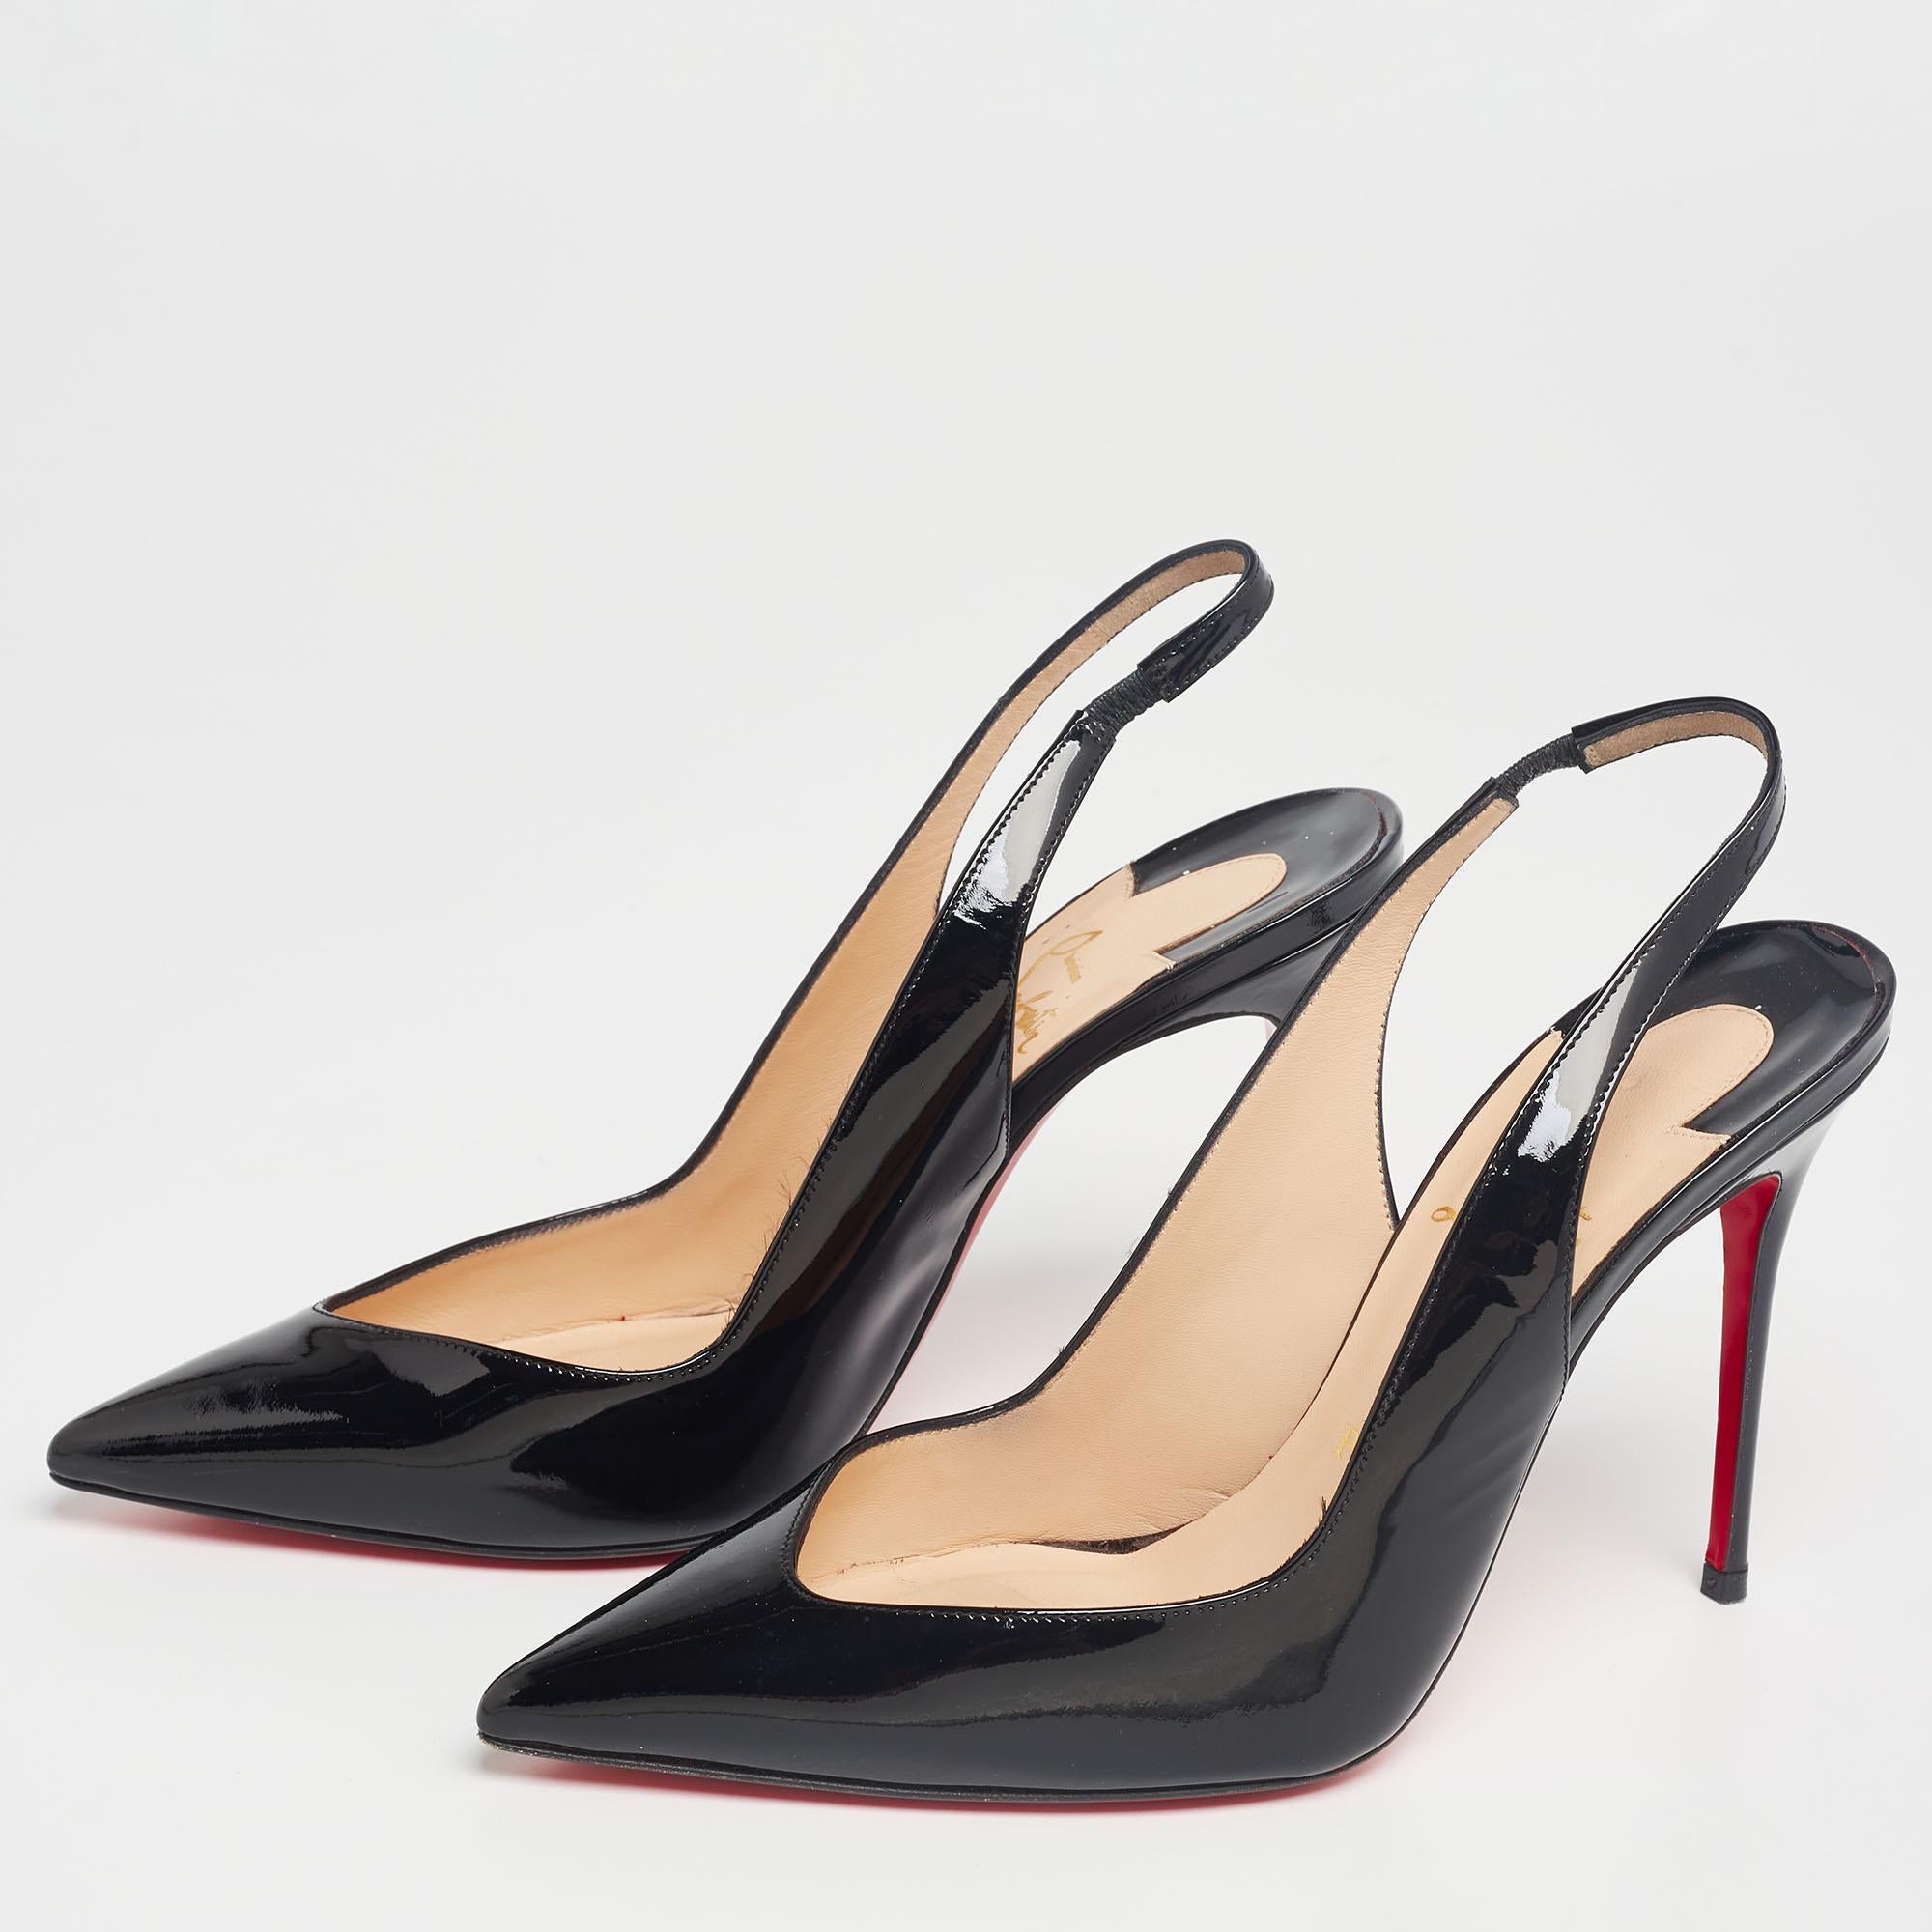 Designed with a modern, simple aesthetic, these Christian Louboutin pumps are gorgeous! From their sleek shape to their patent leather body, the black beauties are meant to bring you the best footwear experience. They feature pointed toes,